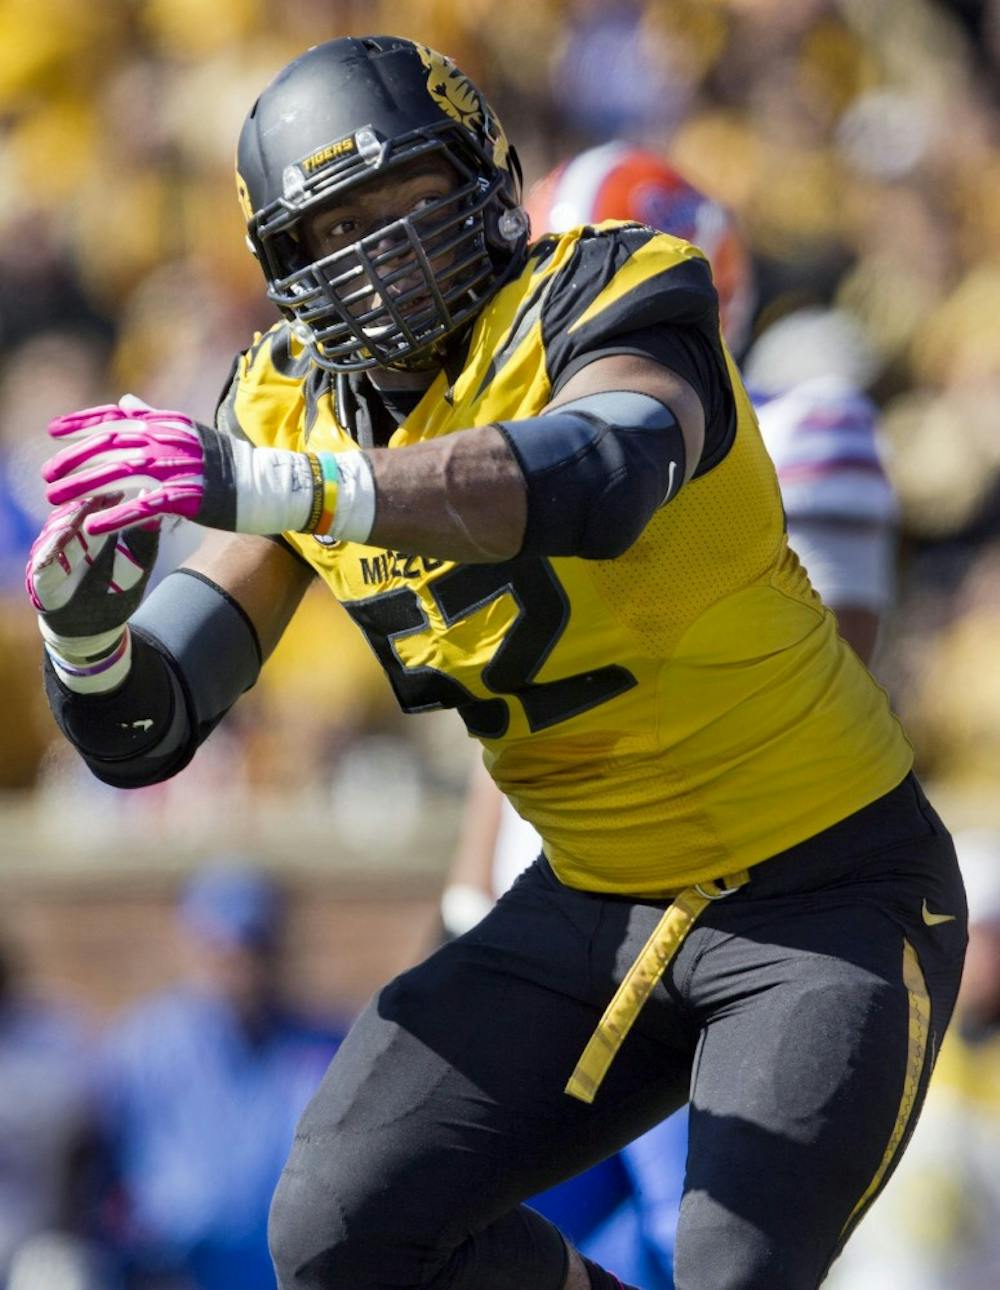 Missouri Tigers defensive lineman Michael Sam on Sunday, Feb. 9, 2014, became the most prominent, and apparently the first, active male athlete on the major U.S. sports scene to publicly disclose that he&apos;s gay. Sam is seen during a college football game against Florida in this October 19, 2013, file photo. MCT PHOTO